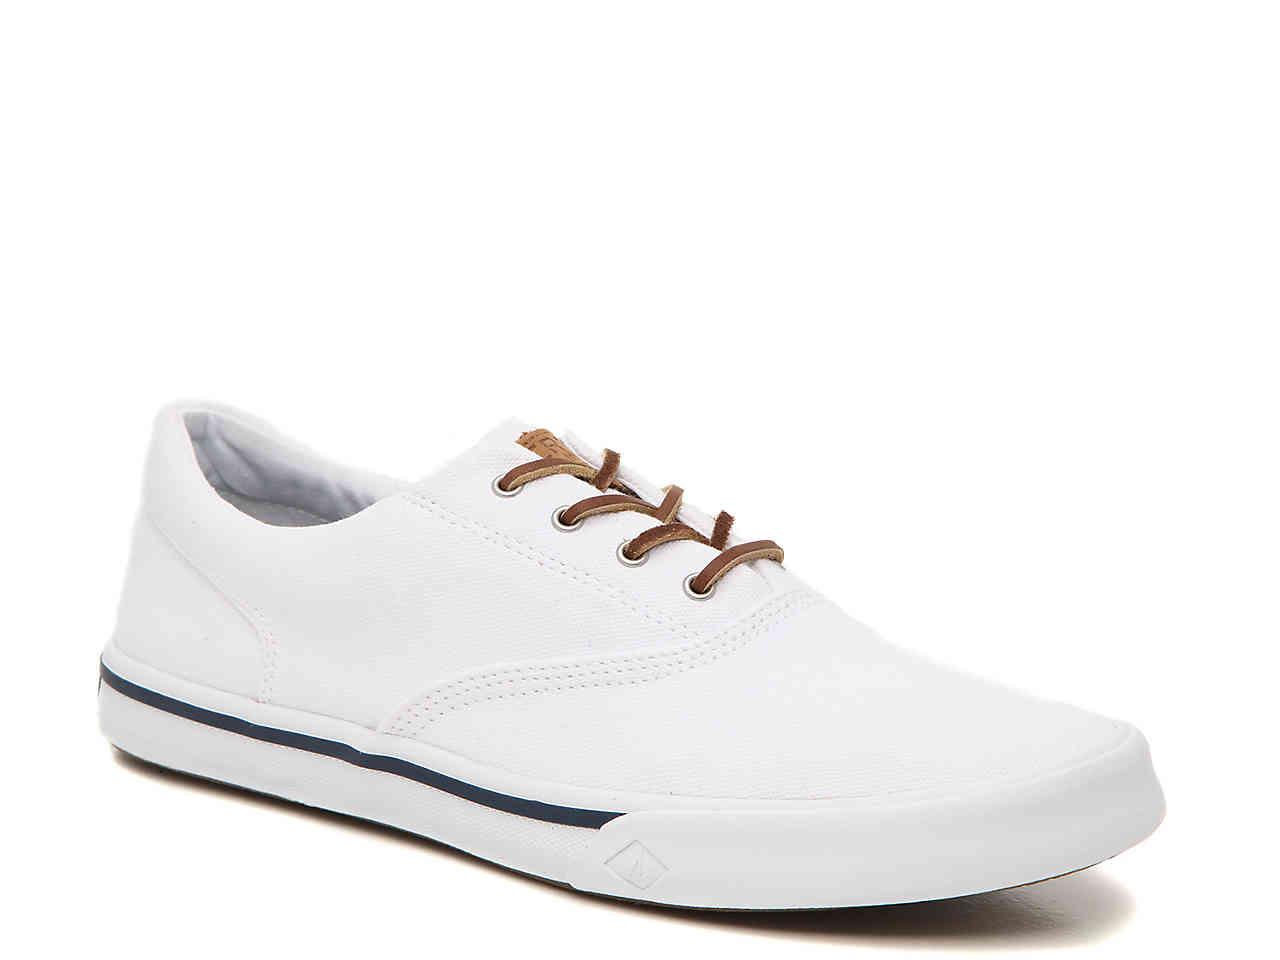 Sperry Top-Sider Canvas Striper Ii Sneaker in White for Men - Save 37% ...